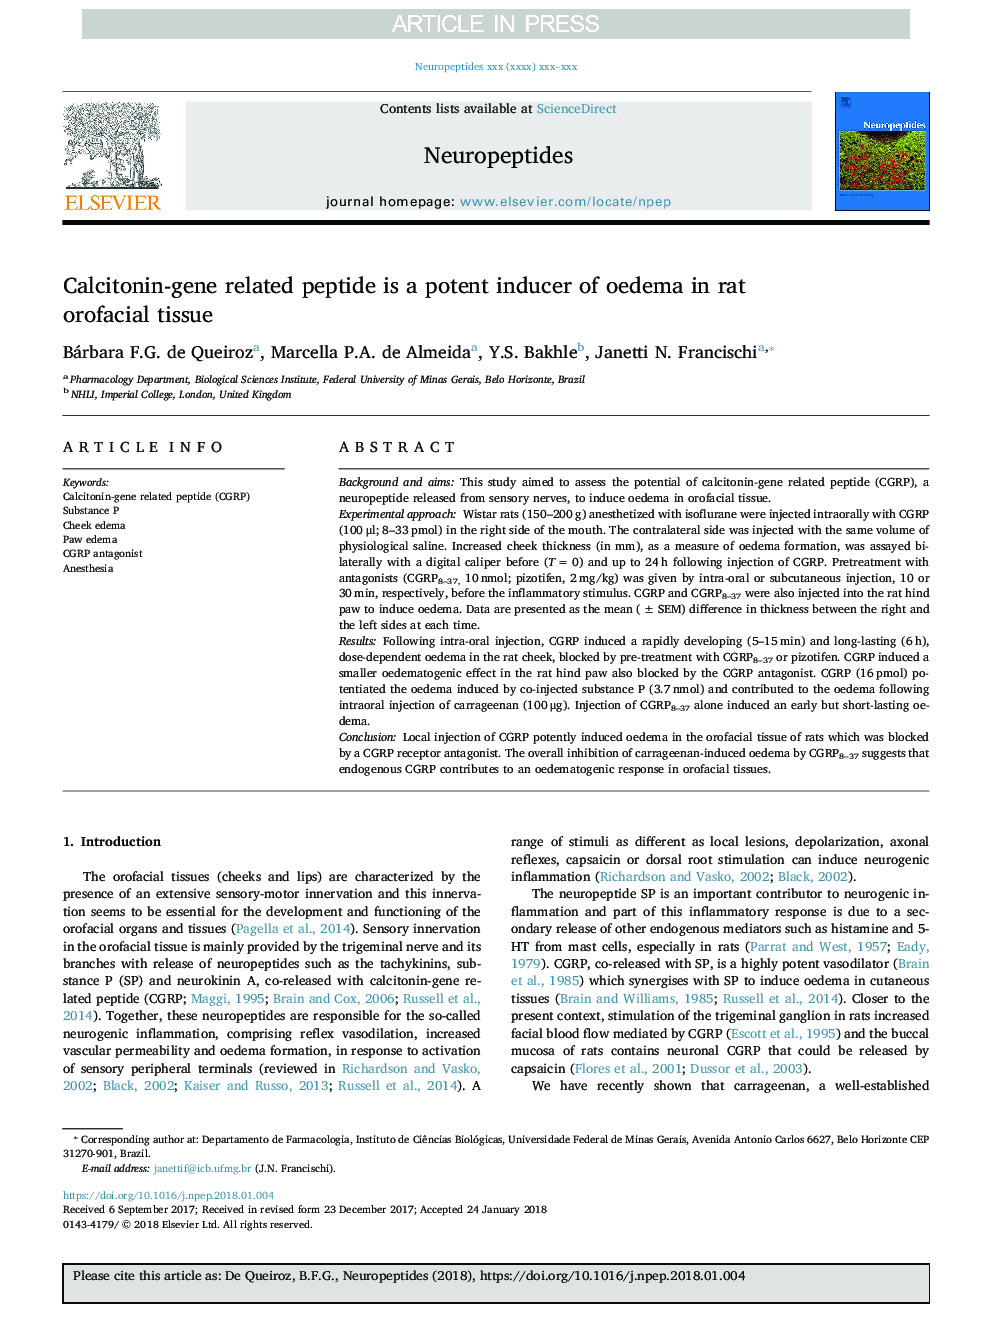 Calcitonin-gene related peptide is a potent inducer of oedema in rat orofacial tissue